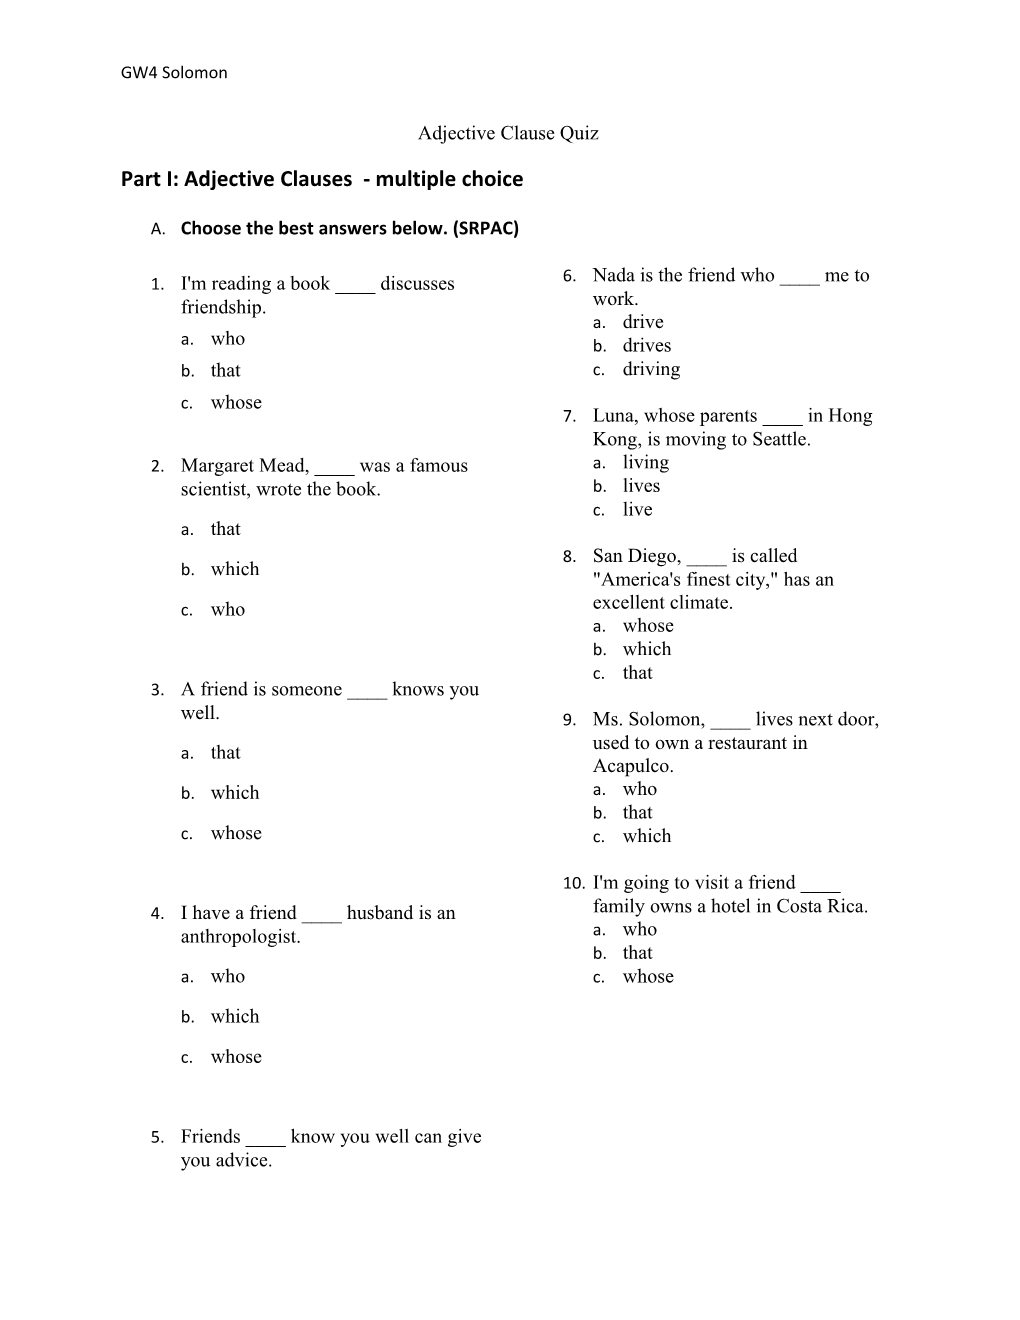 Part I: Adjective Clauses - Multiple Choice